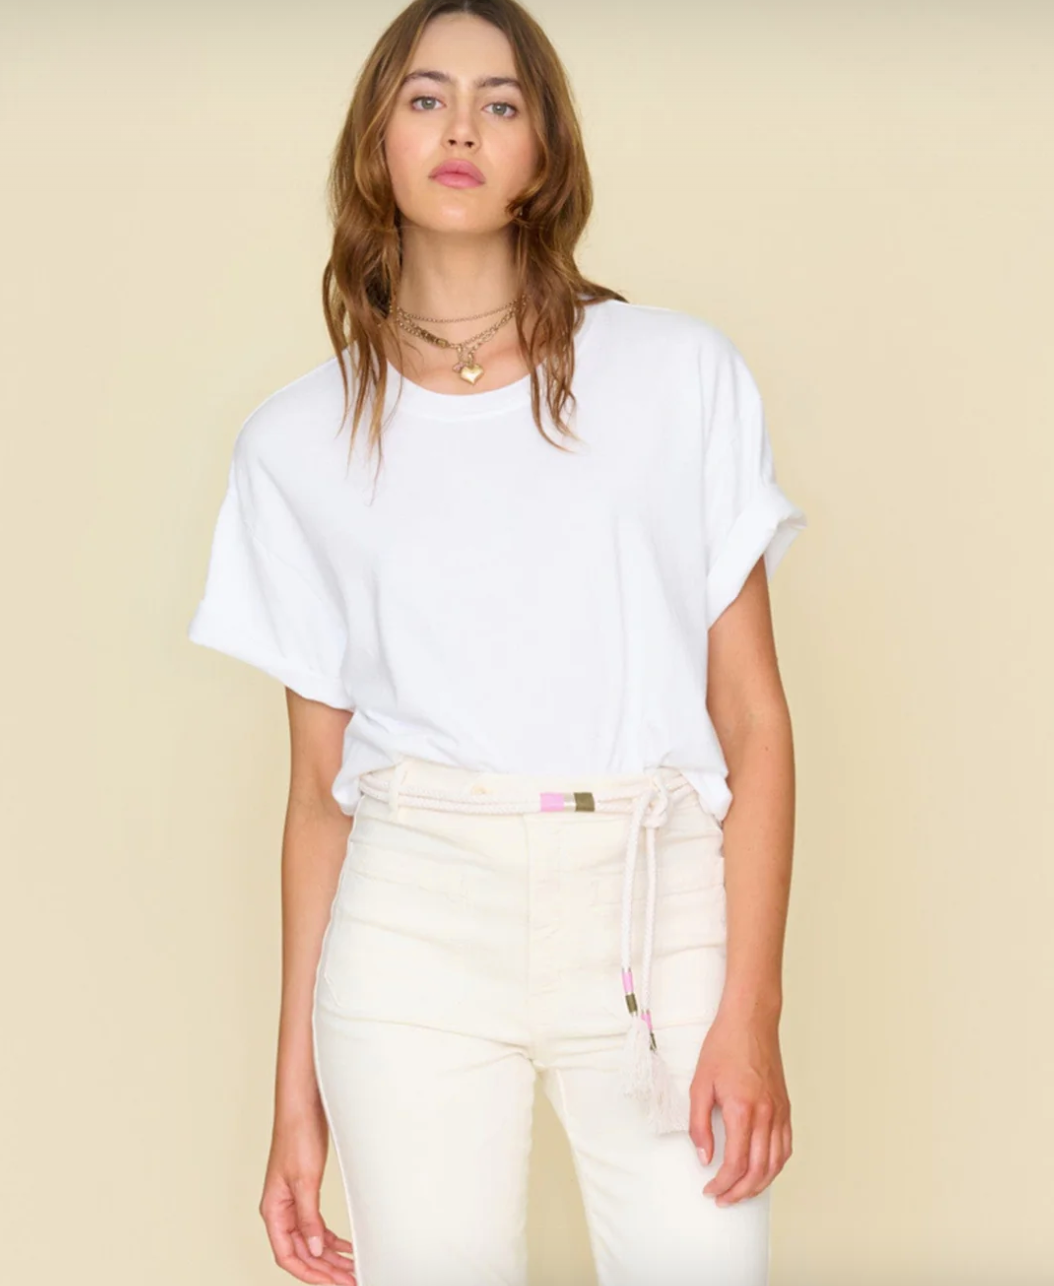 A person with long, wavy hair stands against a beige background reminiscent of a chic Scottsdale bungalow. They are wearing a loose-fitting White Palmer Tee by Xirena, tucked into high-waisted white pants. The outfit is accessorized with a belt and layered necklaces, exuding relaxed and confident vibes.